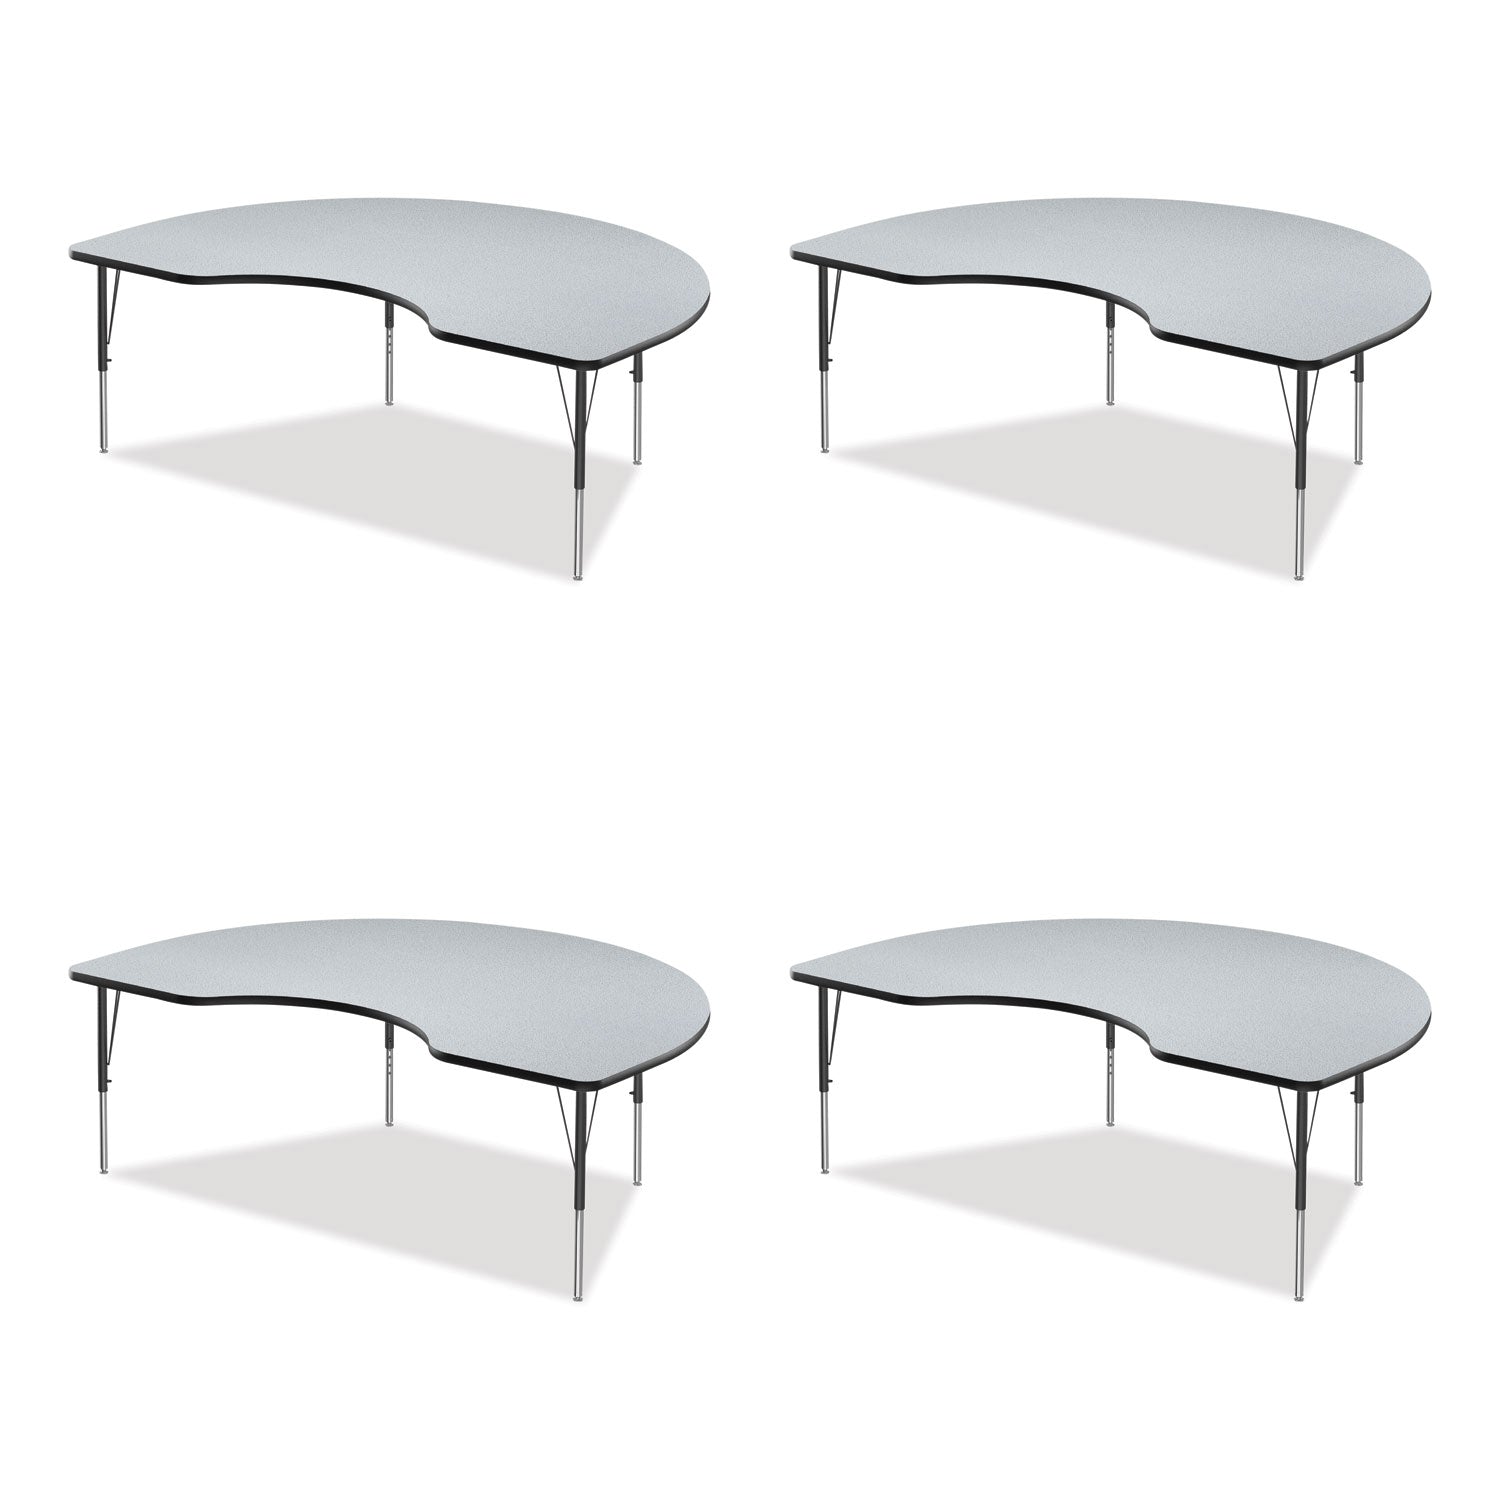 adjustable-activity-tables-kidney-shaped-72-x-48-x-19-to-29-gray-top-gray-legs-4-pallet-ships-in-4-6-business-days_crl4872tf15954p - 1